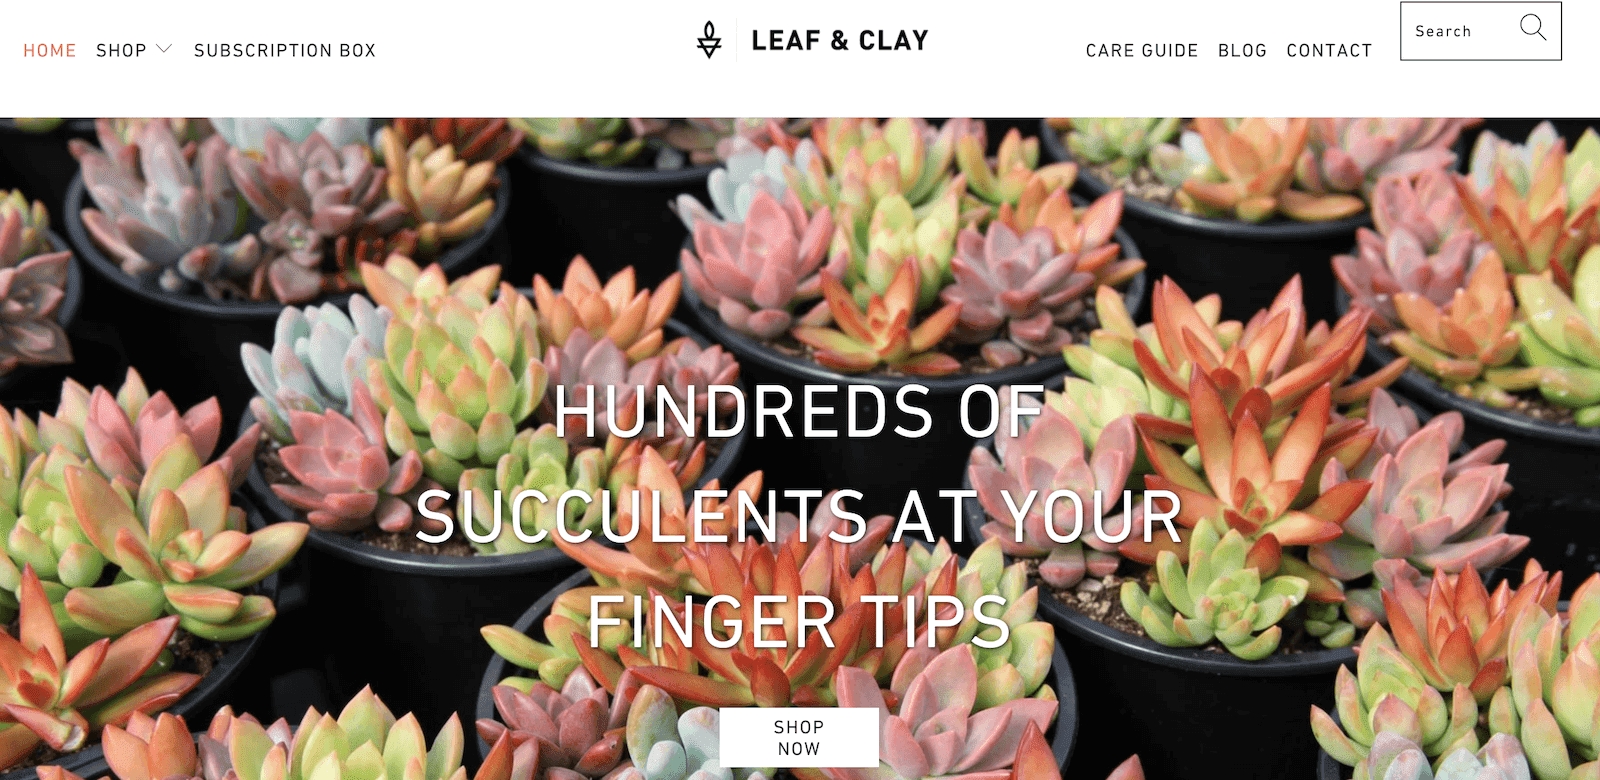 Leaf & Clay homepage showing image of many succulent plants available for sale.